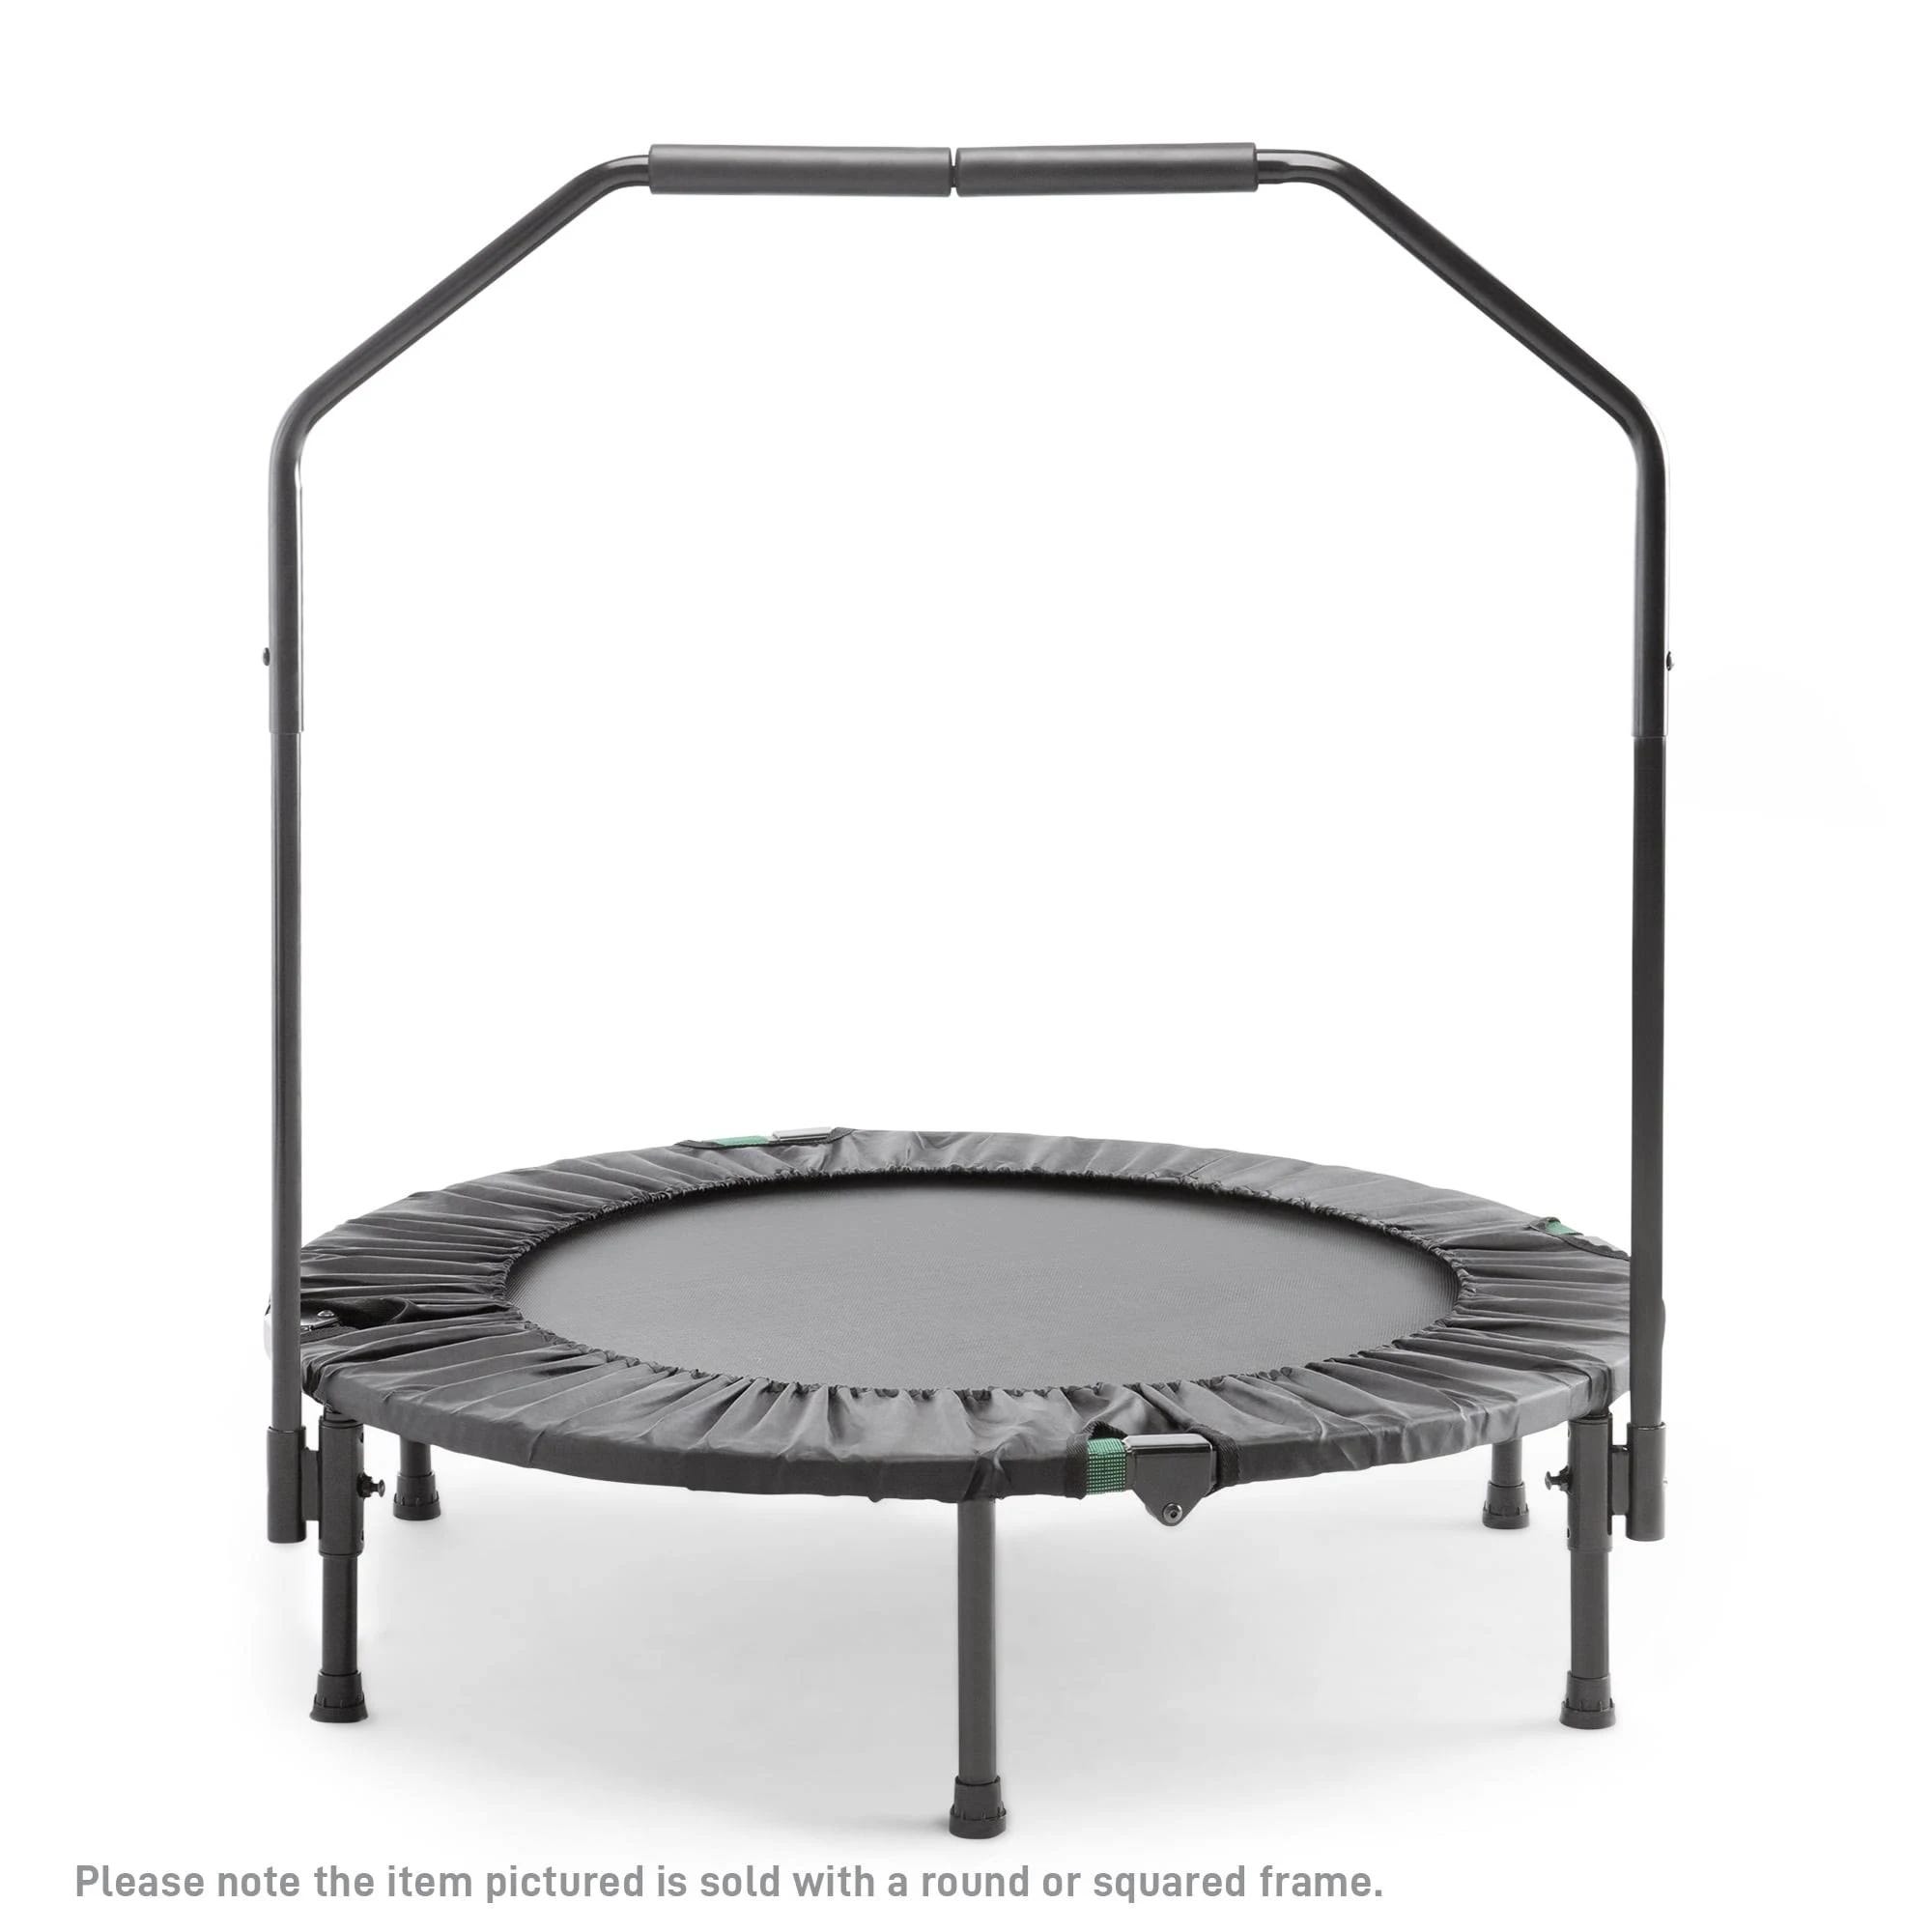 Marcy Home Gym - Compact 40-Inch Trampoline Cardio Trainer with Handrail (Black) for Low-Impact Aerobic Workouts | Image